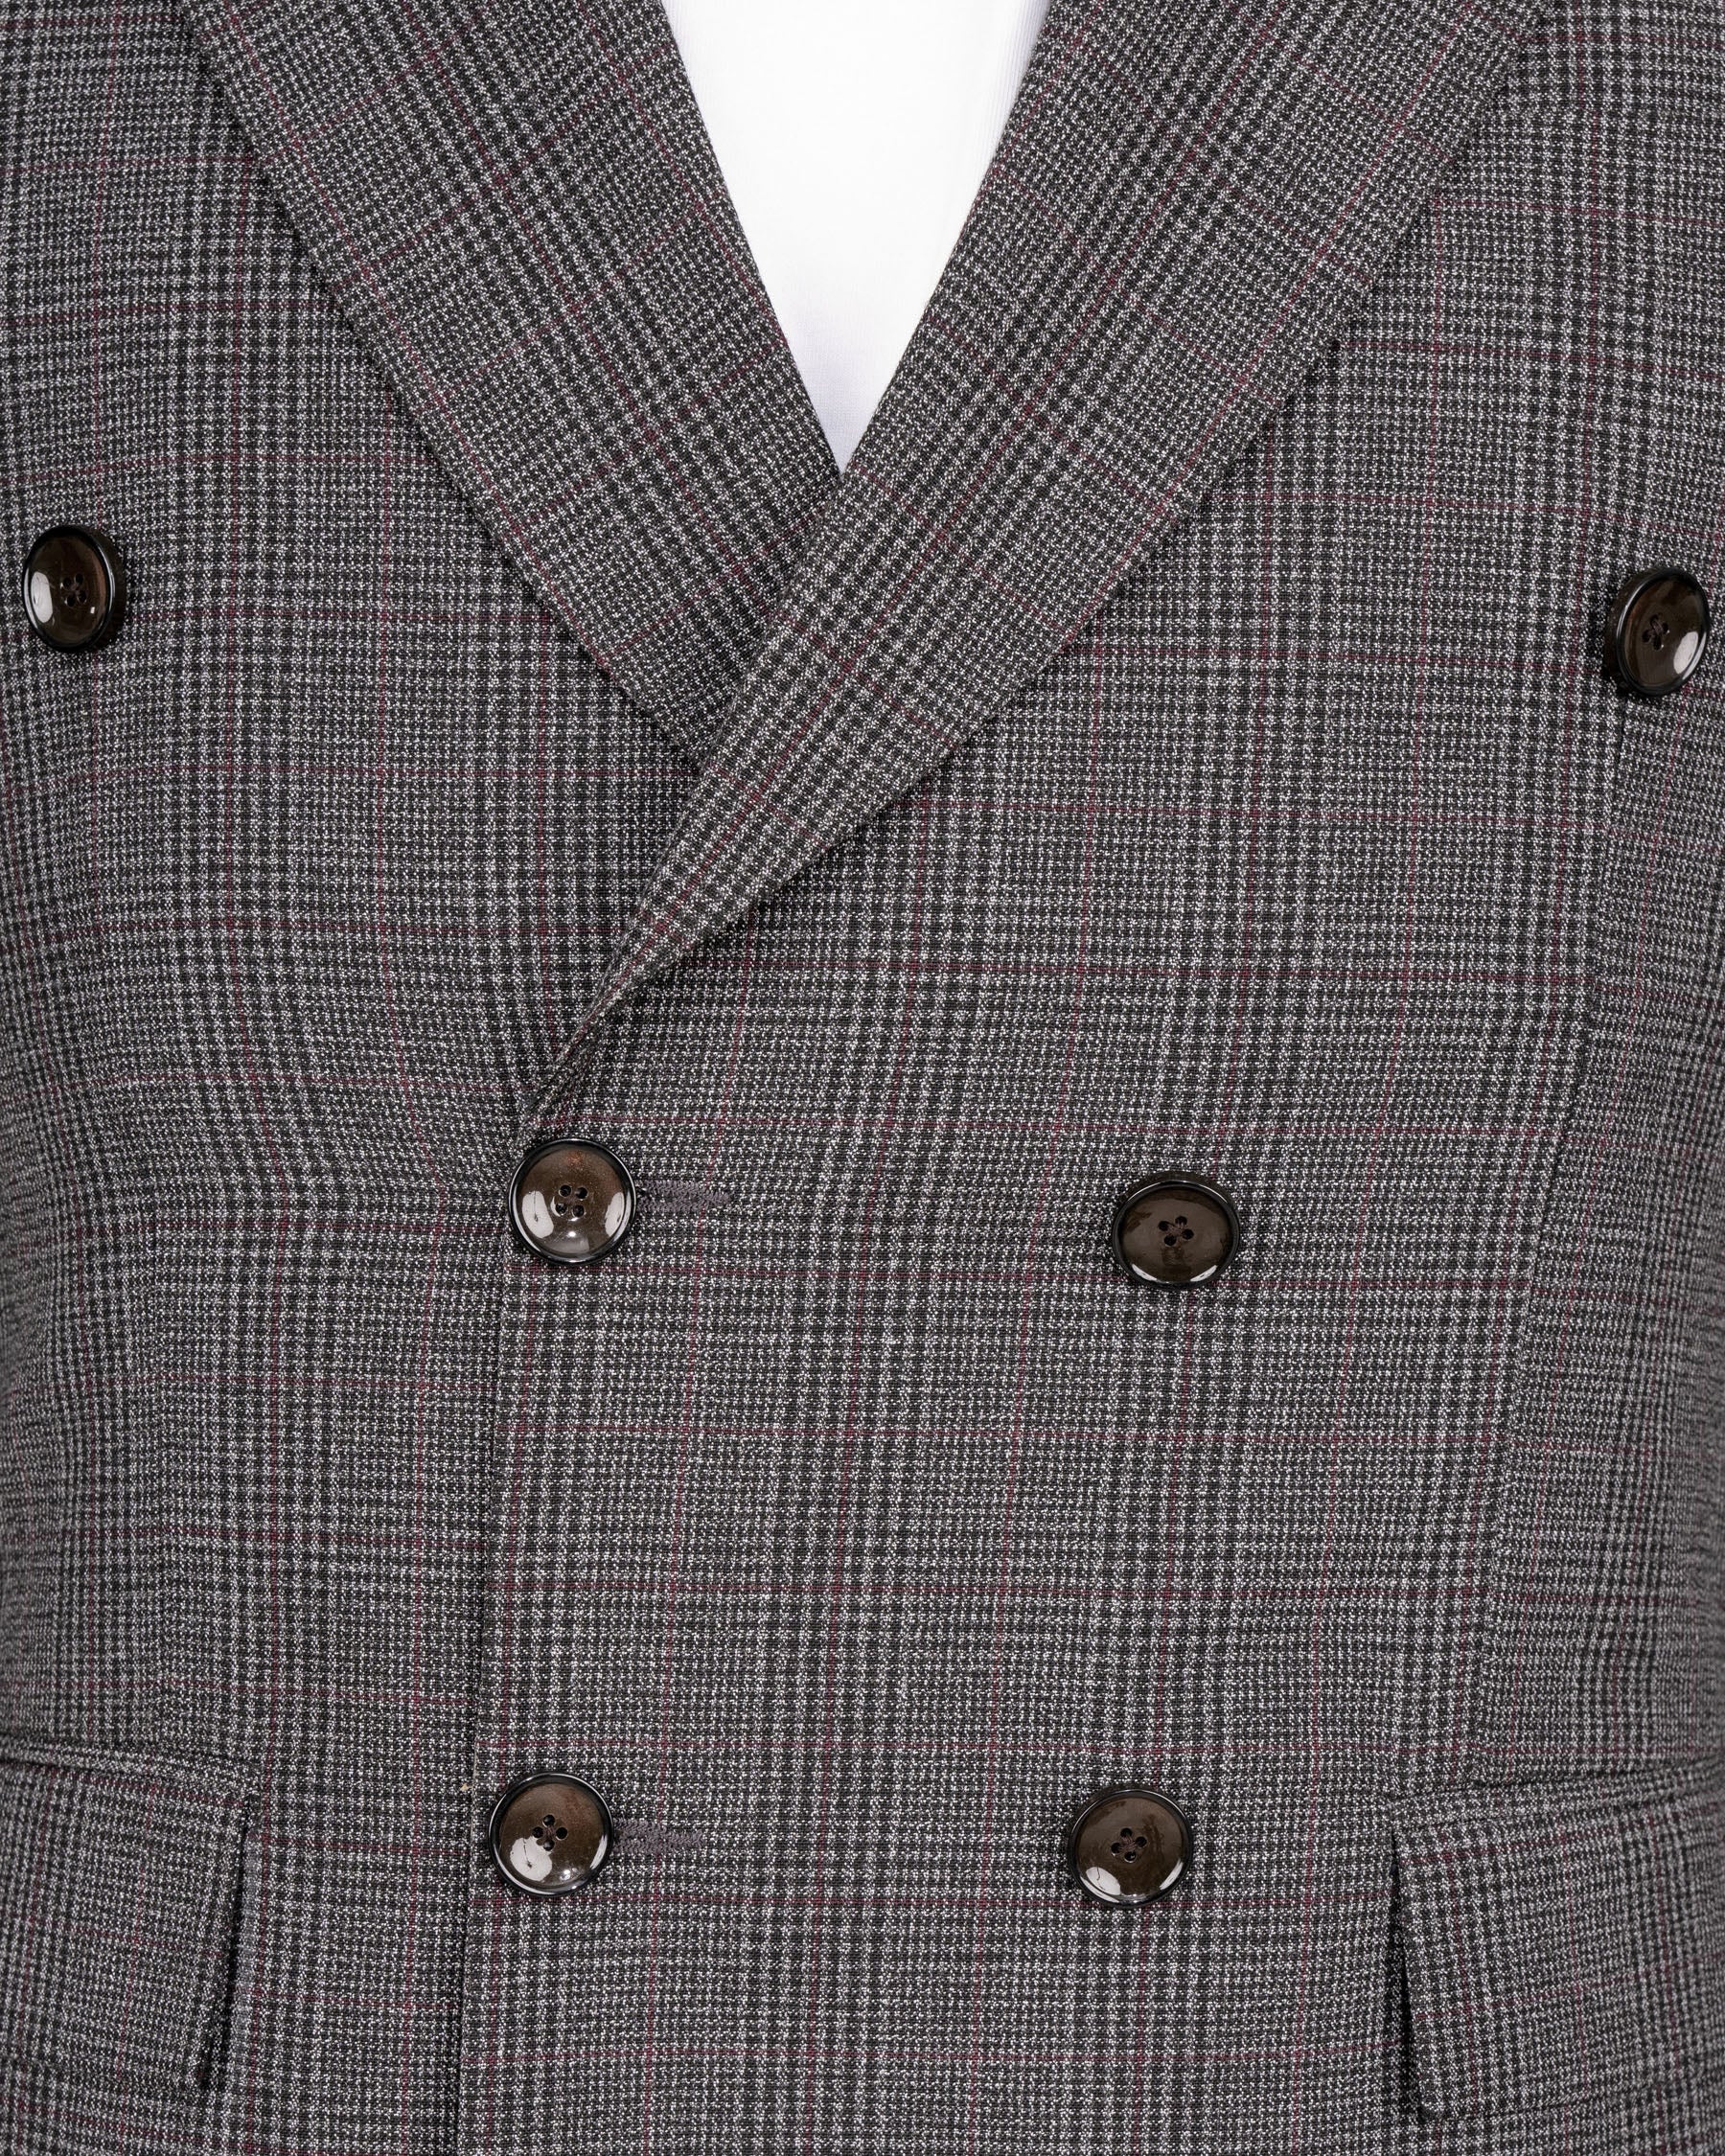 Scorpion Grey Subtle Plaid Double Breasted Wool Rich Blazer BL1365-DB-36, BL1365-DB-38, BL1365-DB-40, BL1365-DB-42, BL1365-DB-44, BL1365-DB-46, BL1365-DB-48, BL1365-DB-50, BL1365-DB-52, BL1365-DB-54, BL1365-DB-56, BL1365-DB-58, BL1365-DB-60